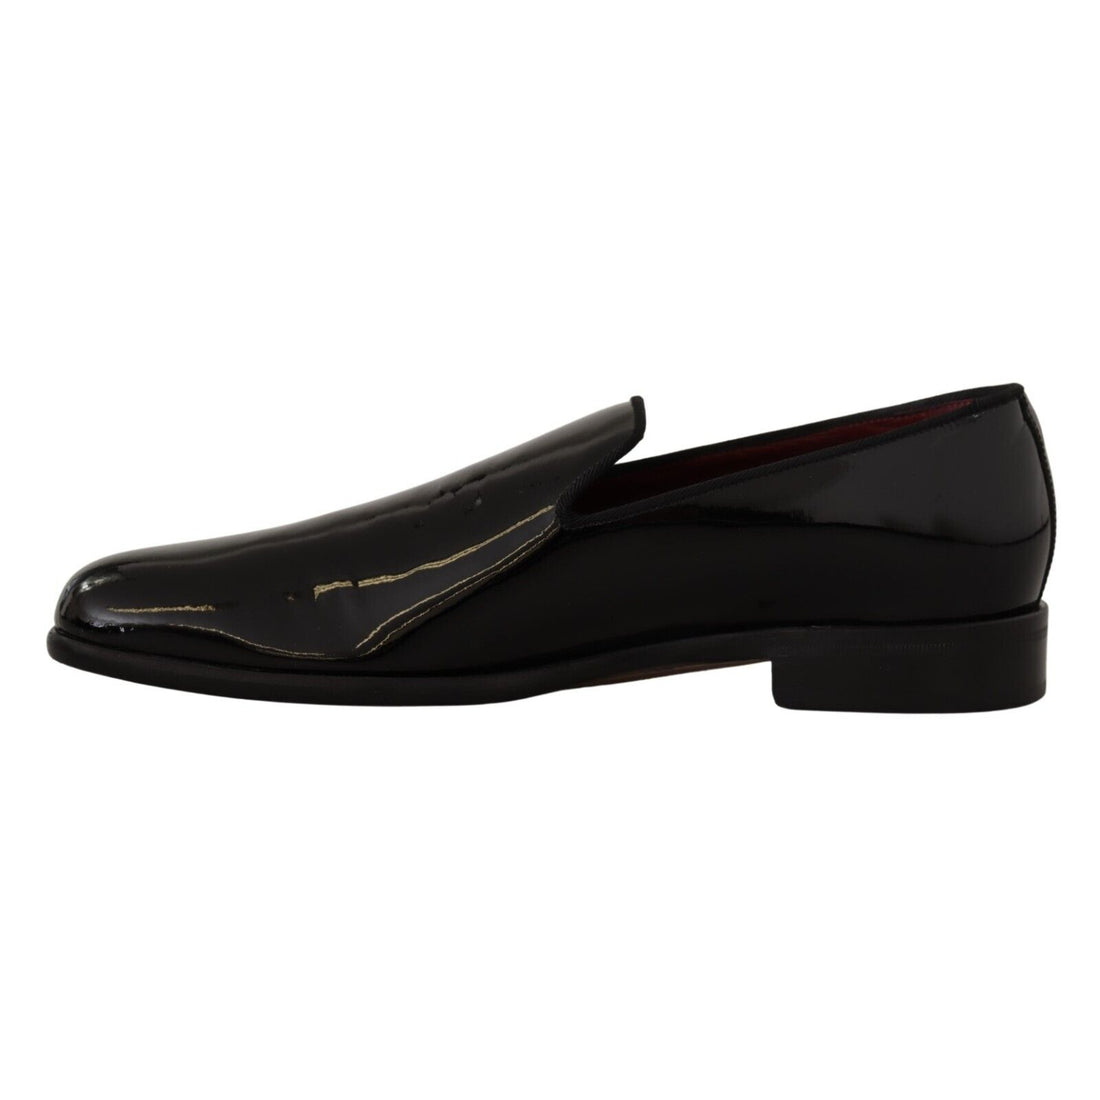 Dolce & Gabbana Black Patent Leather Formal Loafers Dress Shoes